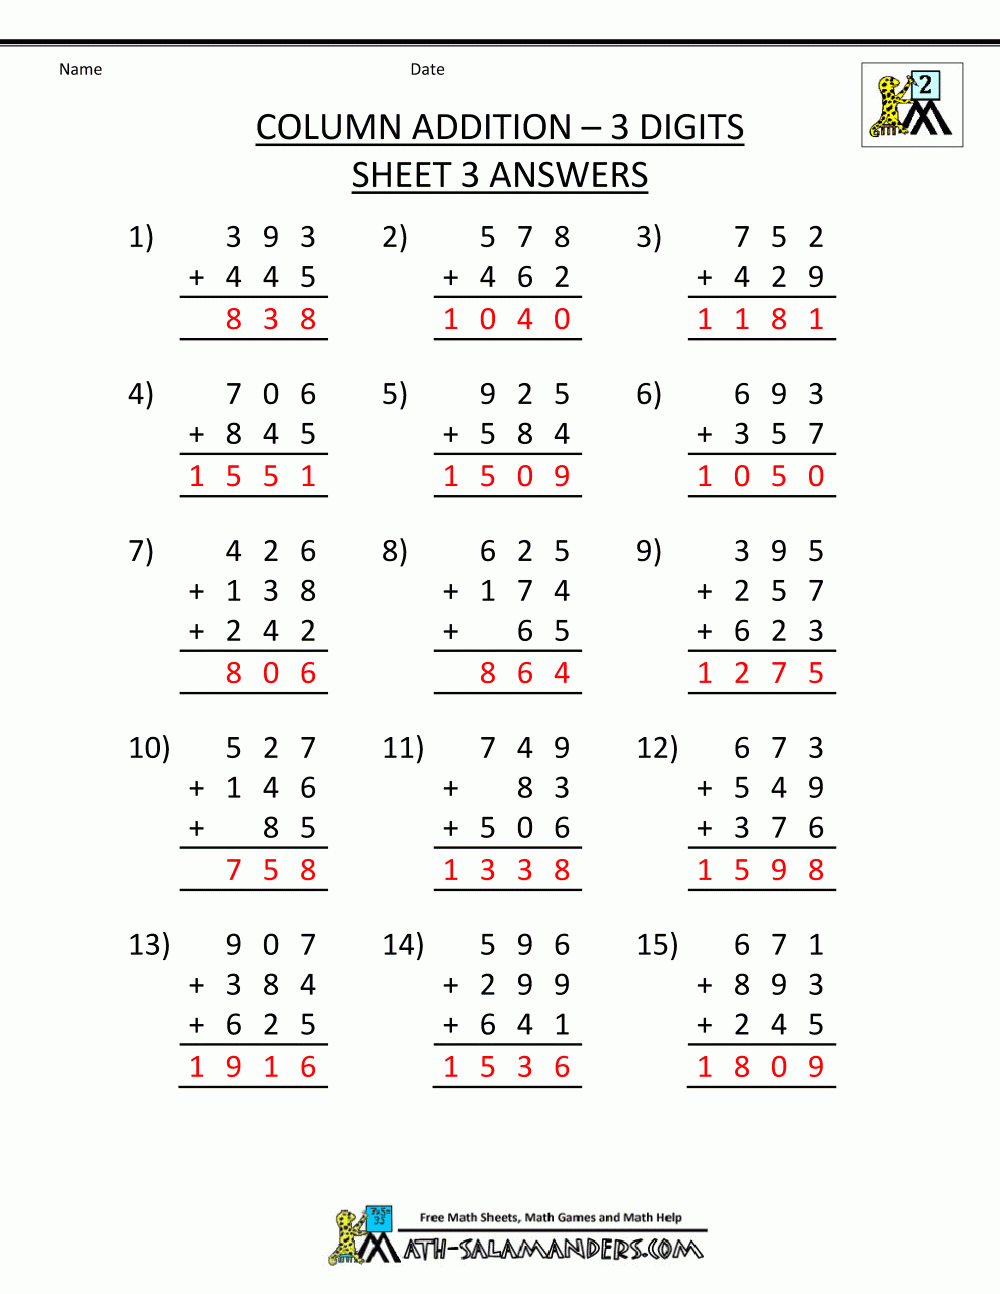 Multiplication Practice Worksheets To 5x5 Free Printable